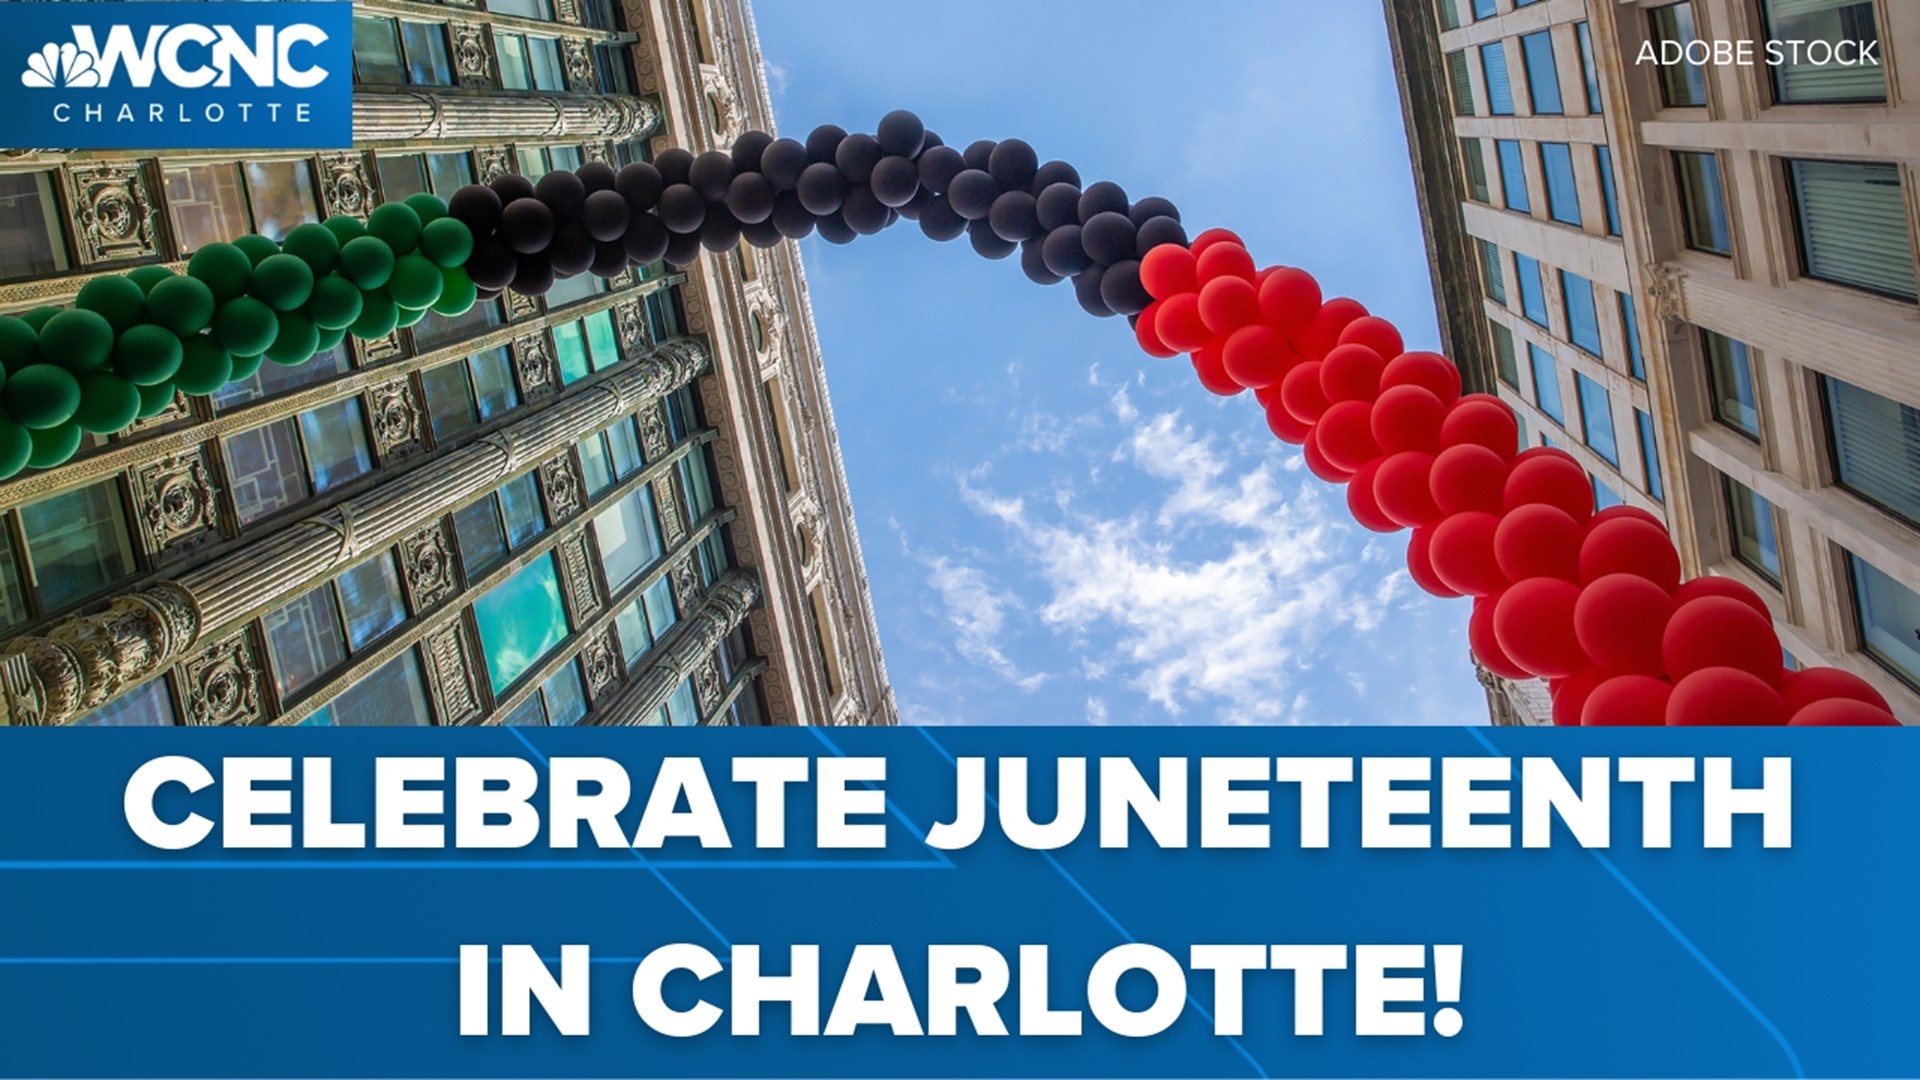 There are plenty of opportunities to celebrate Juneteenth in and around the Charlotte area this weekend.